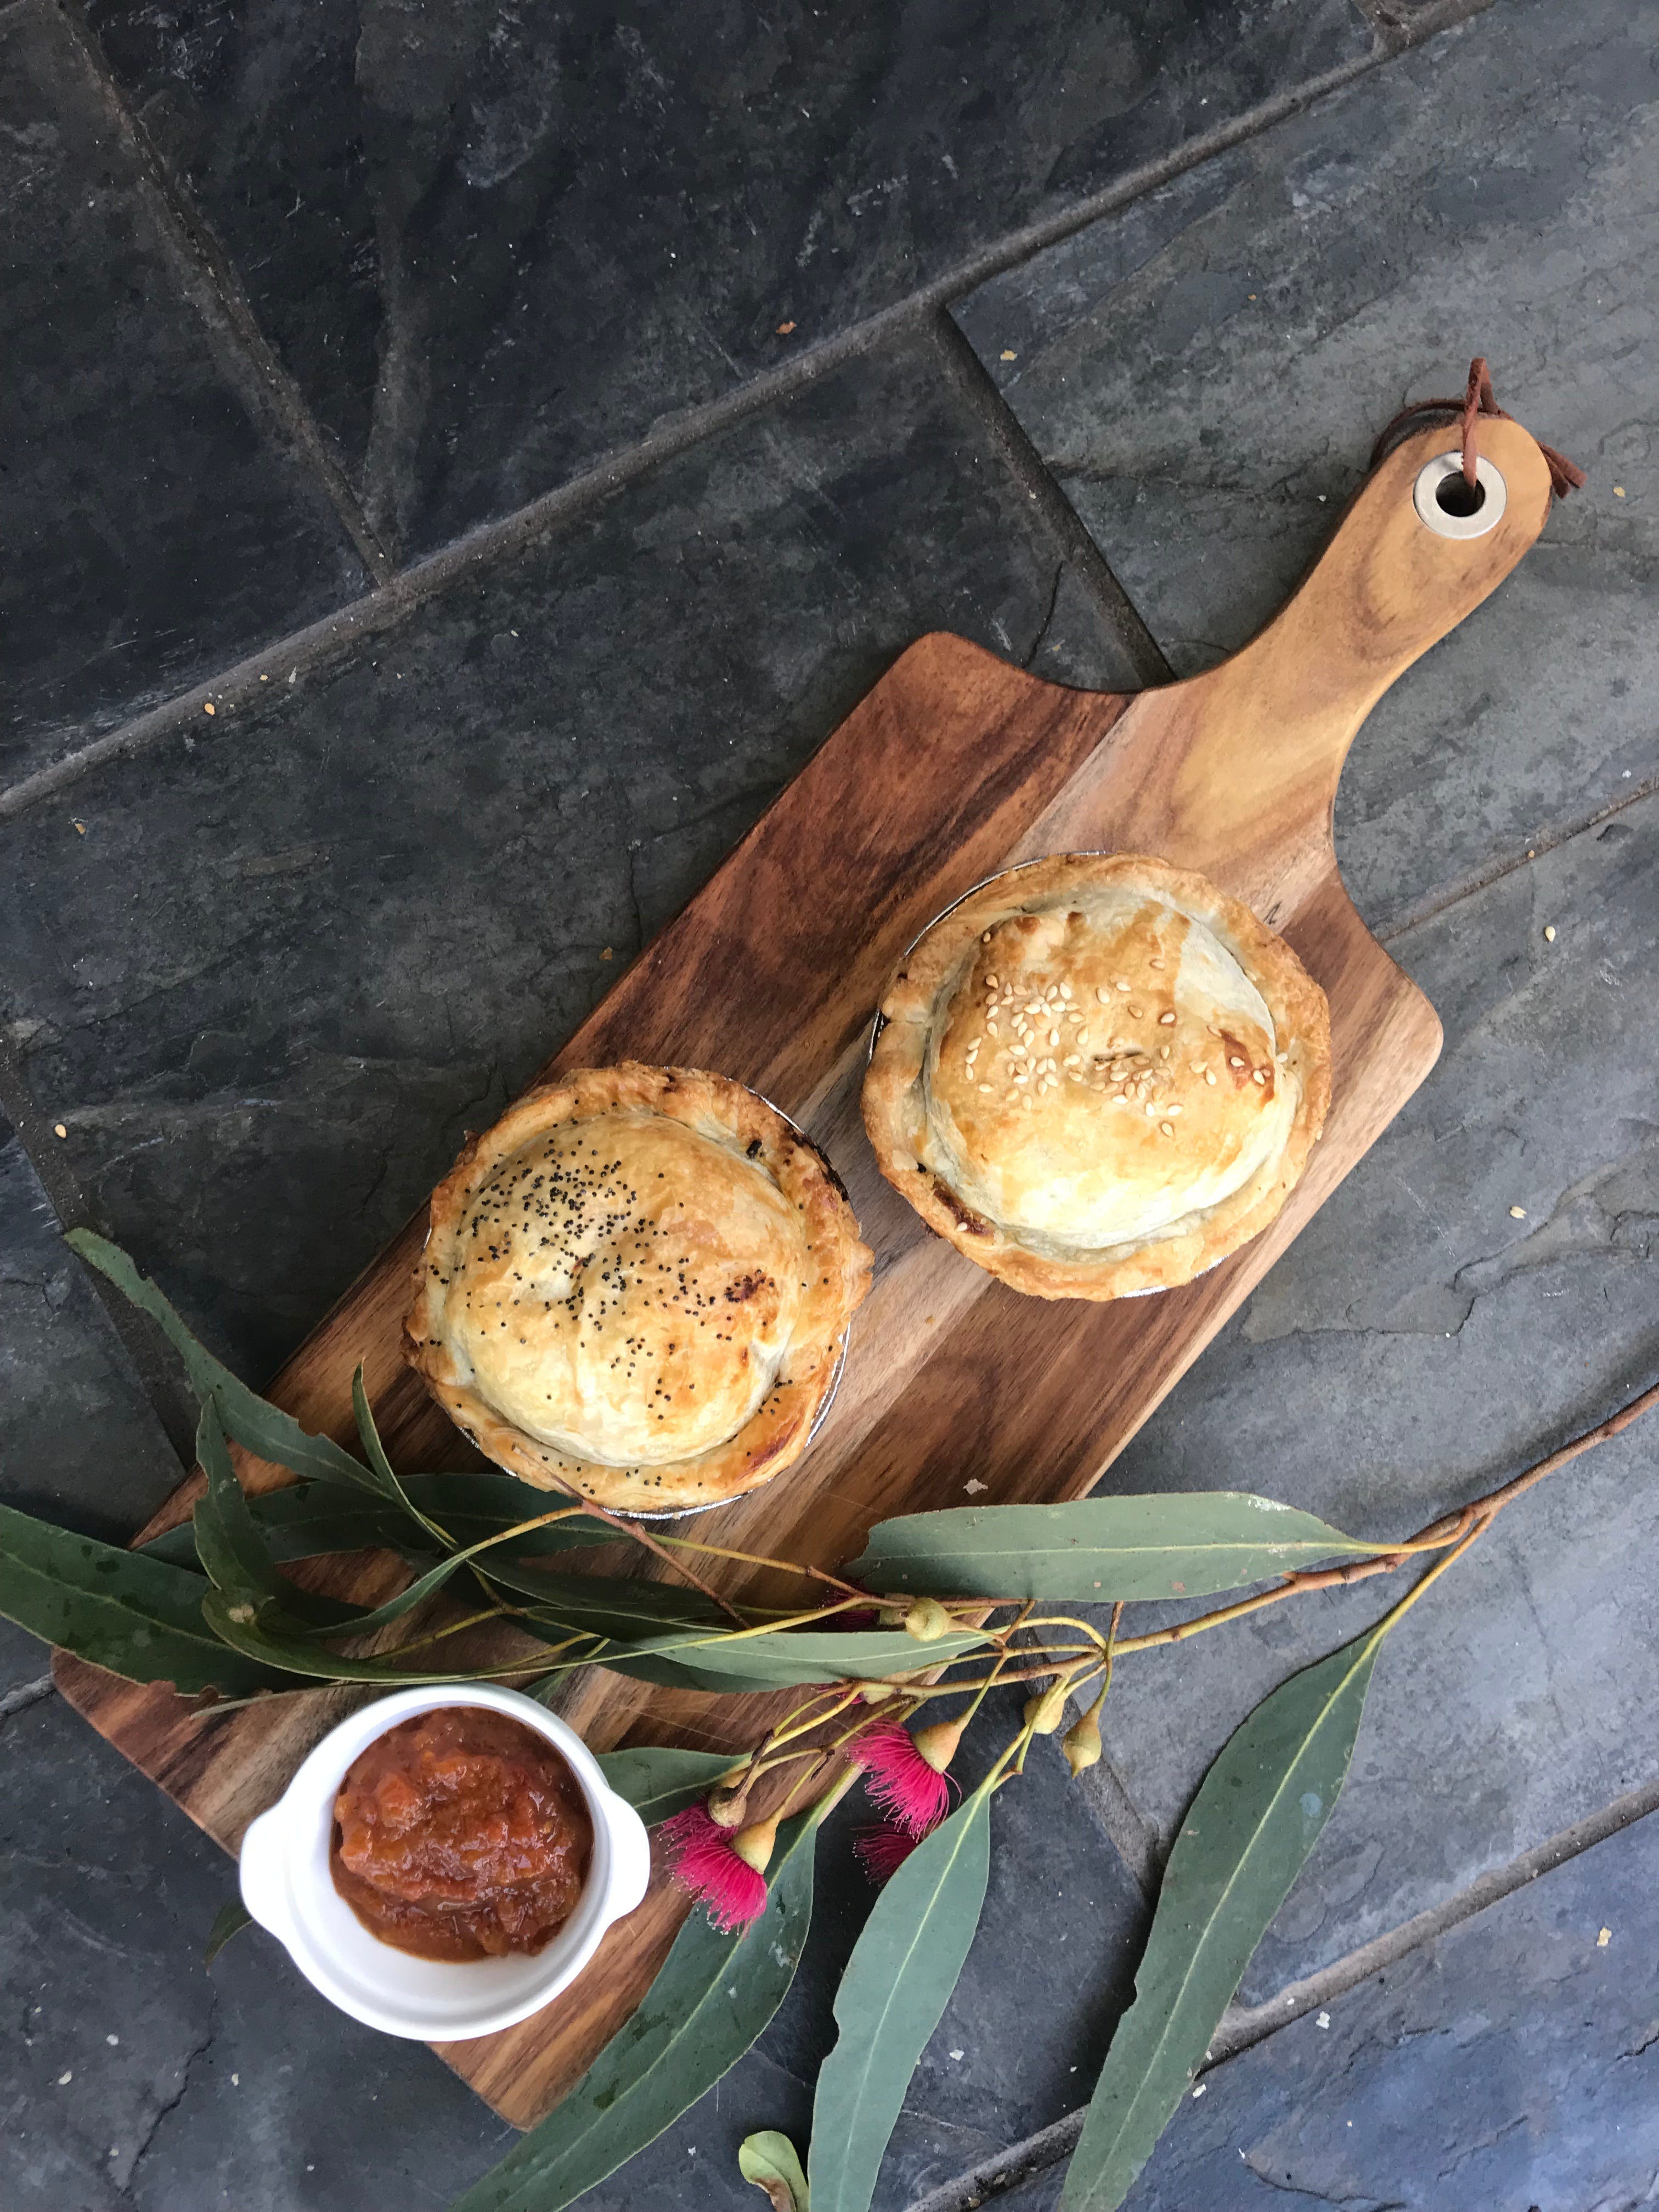 Aged Wine and Vintage Pies - Melbourne Tourism